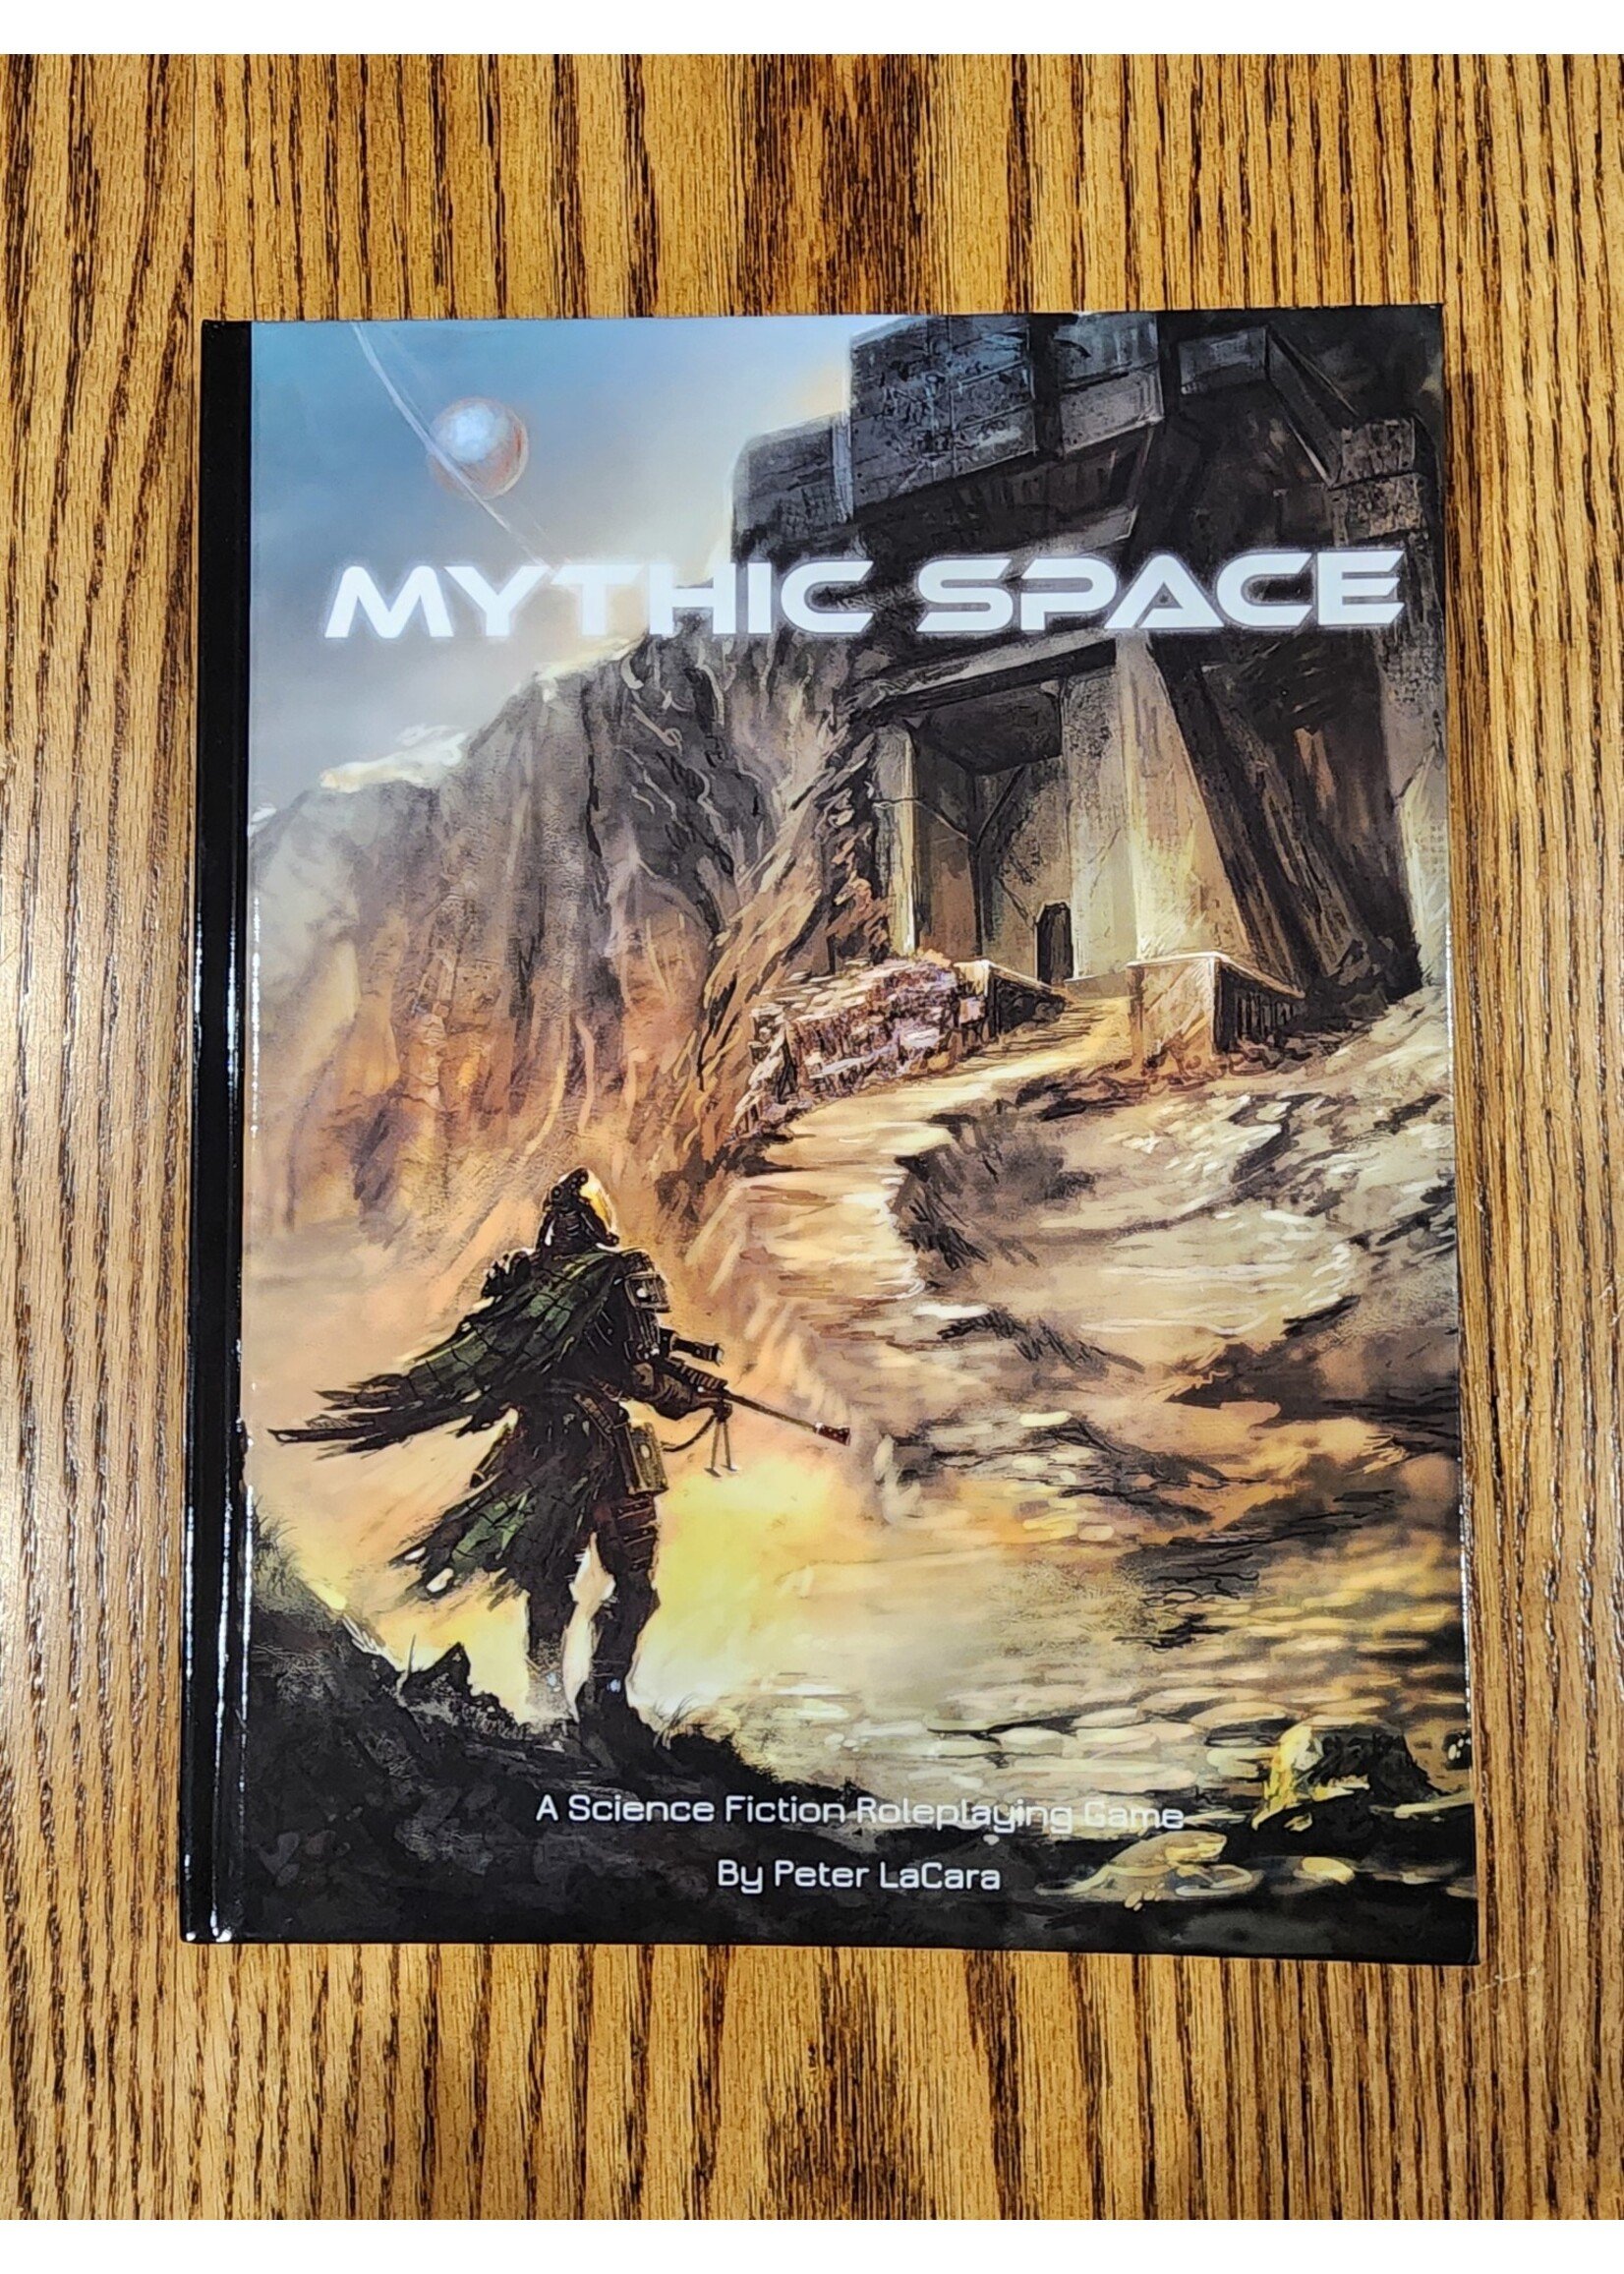 Mythic Space RPG - By Rochester's own Peter LaCara